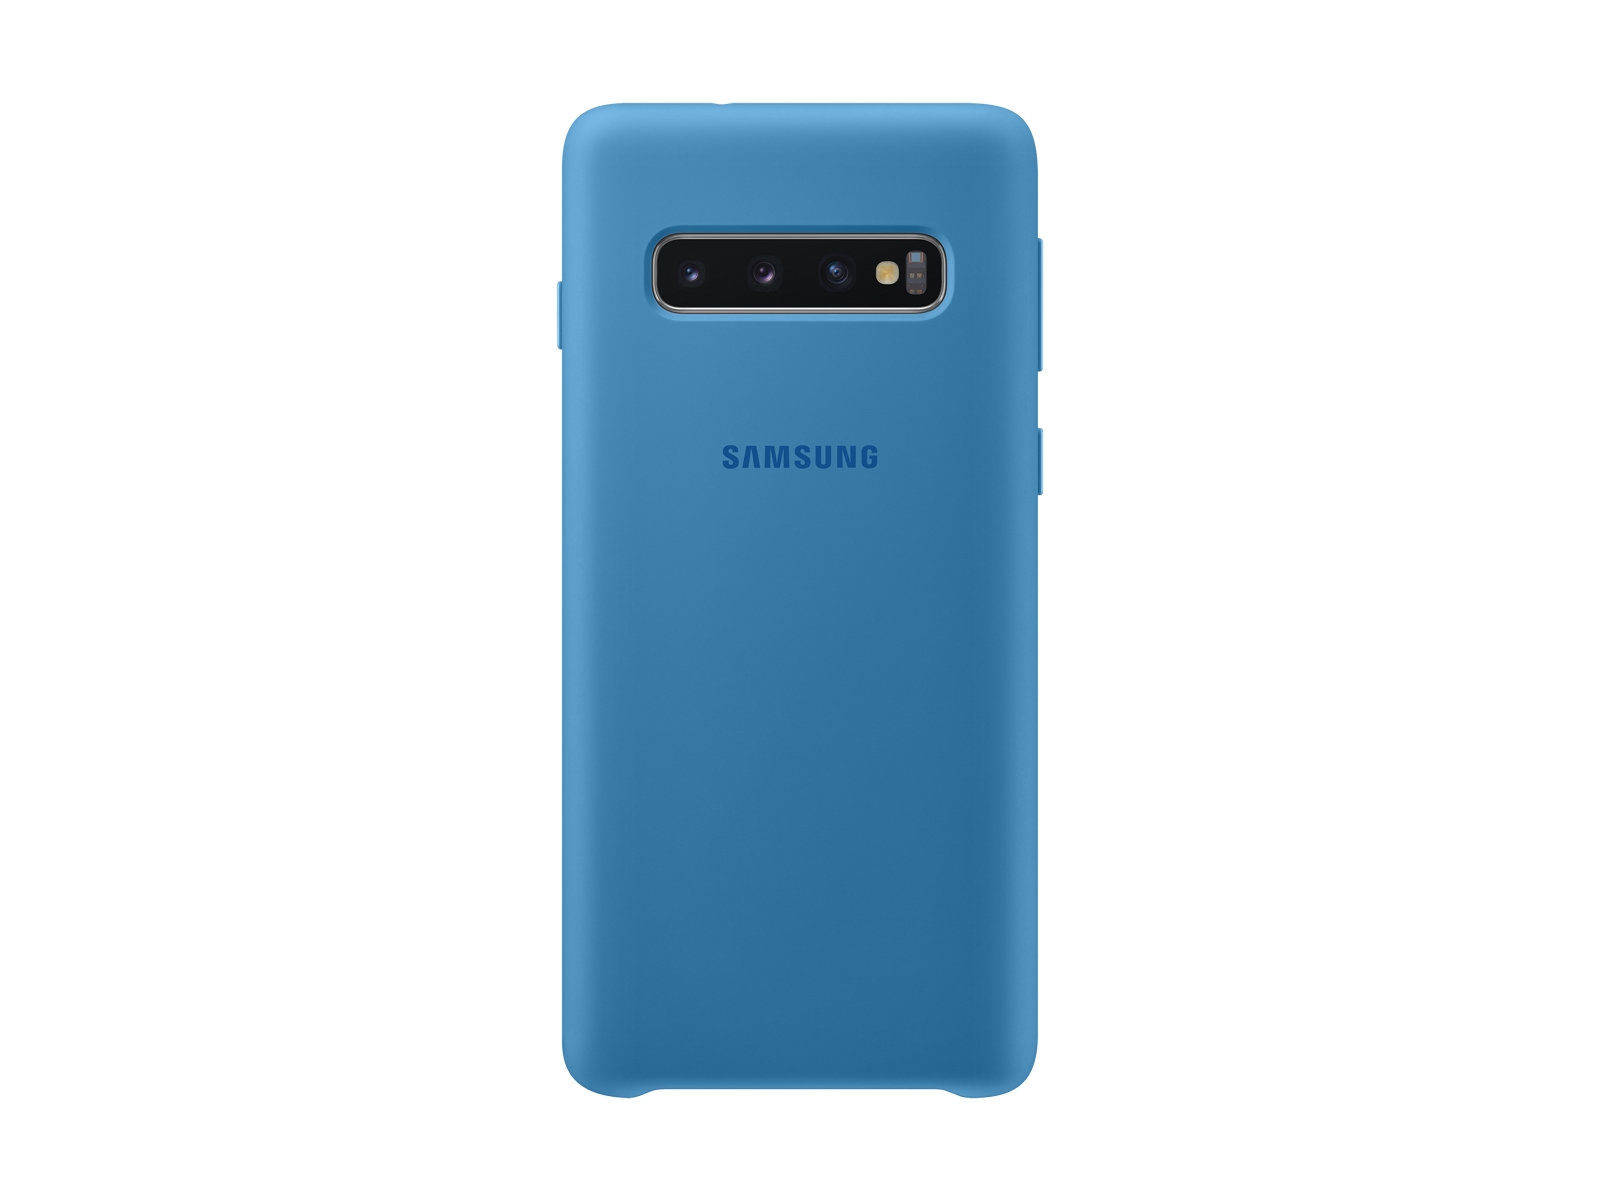 Thumbnail image of Galaxy S10 Silicone Cover, Blue